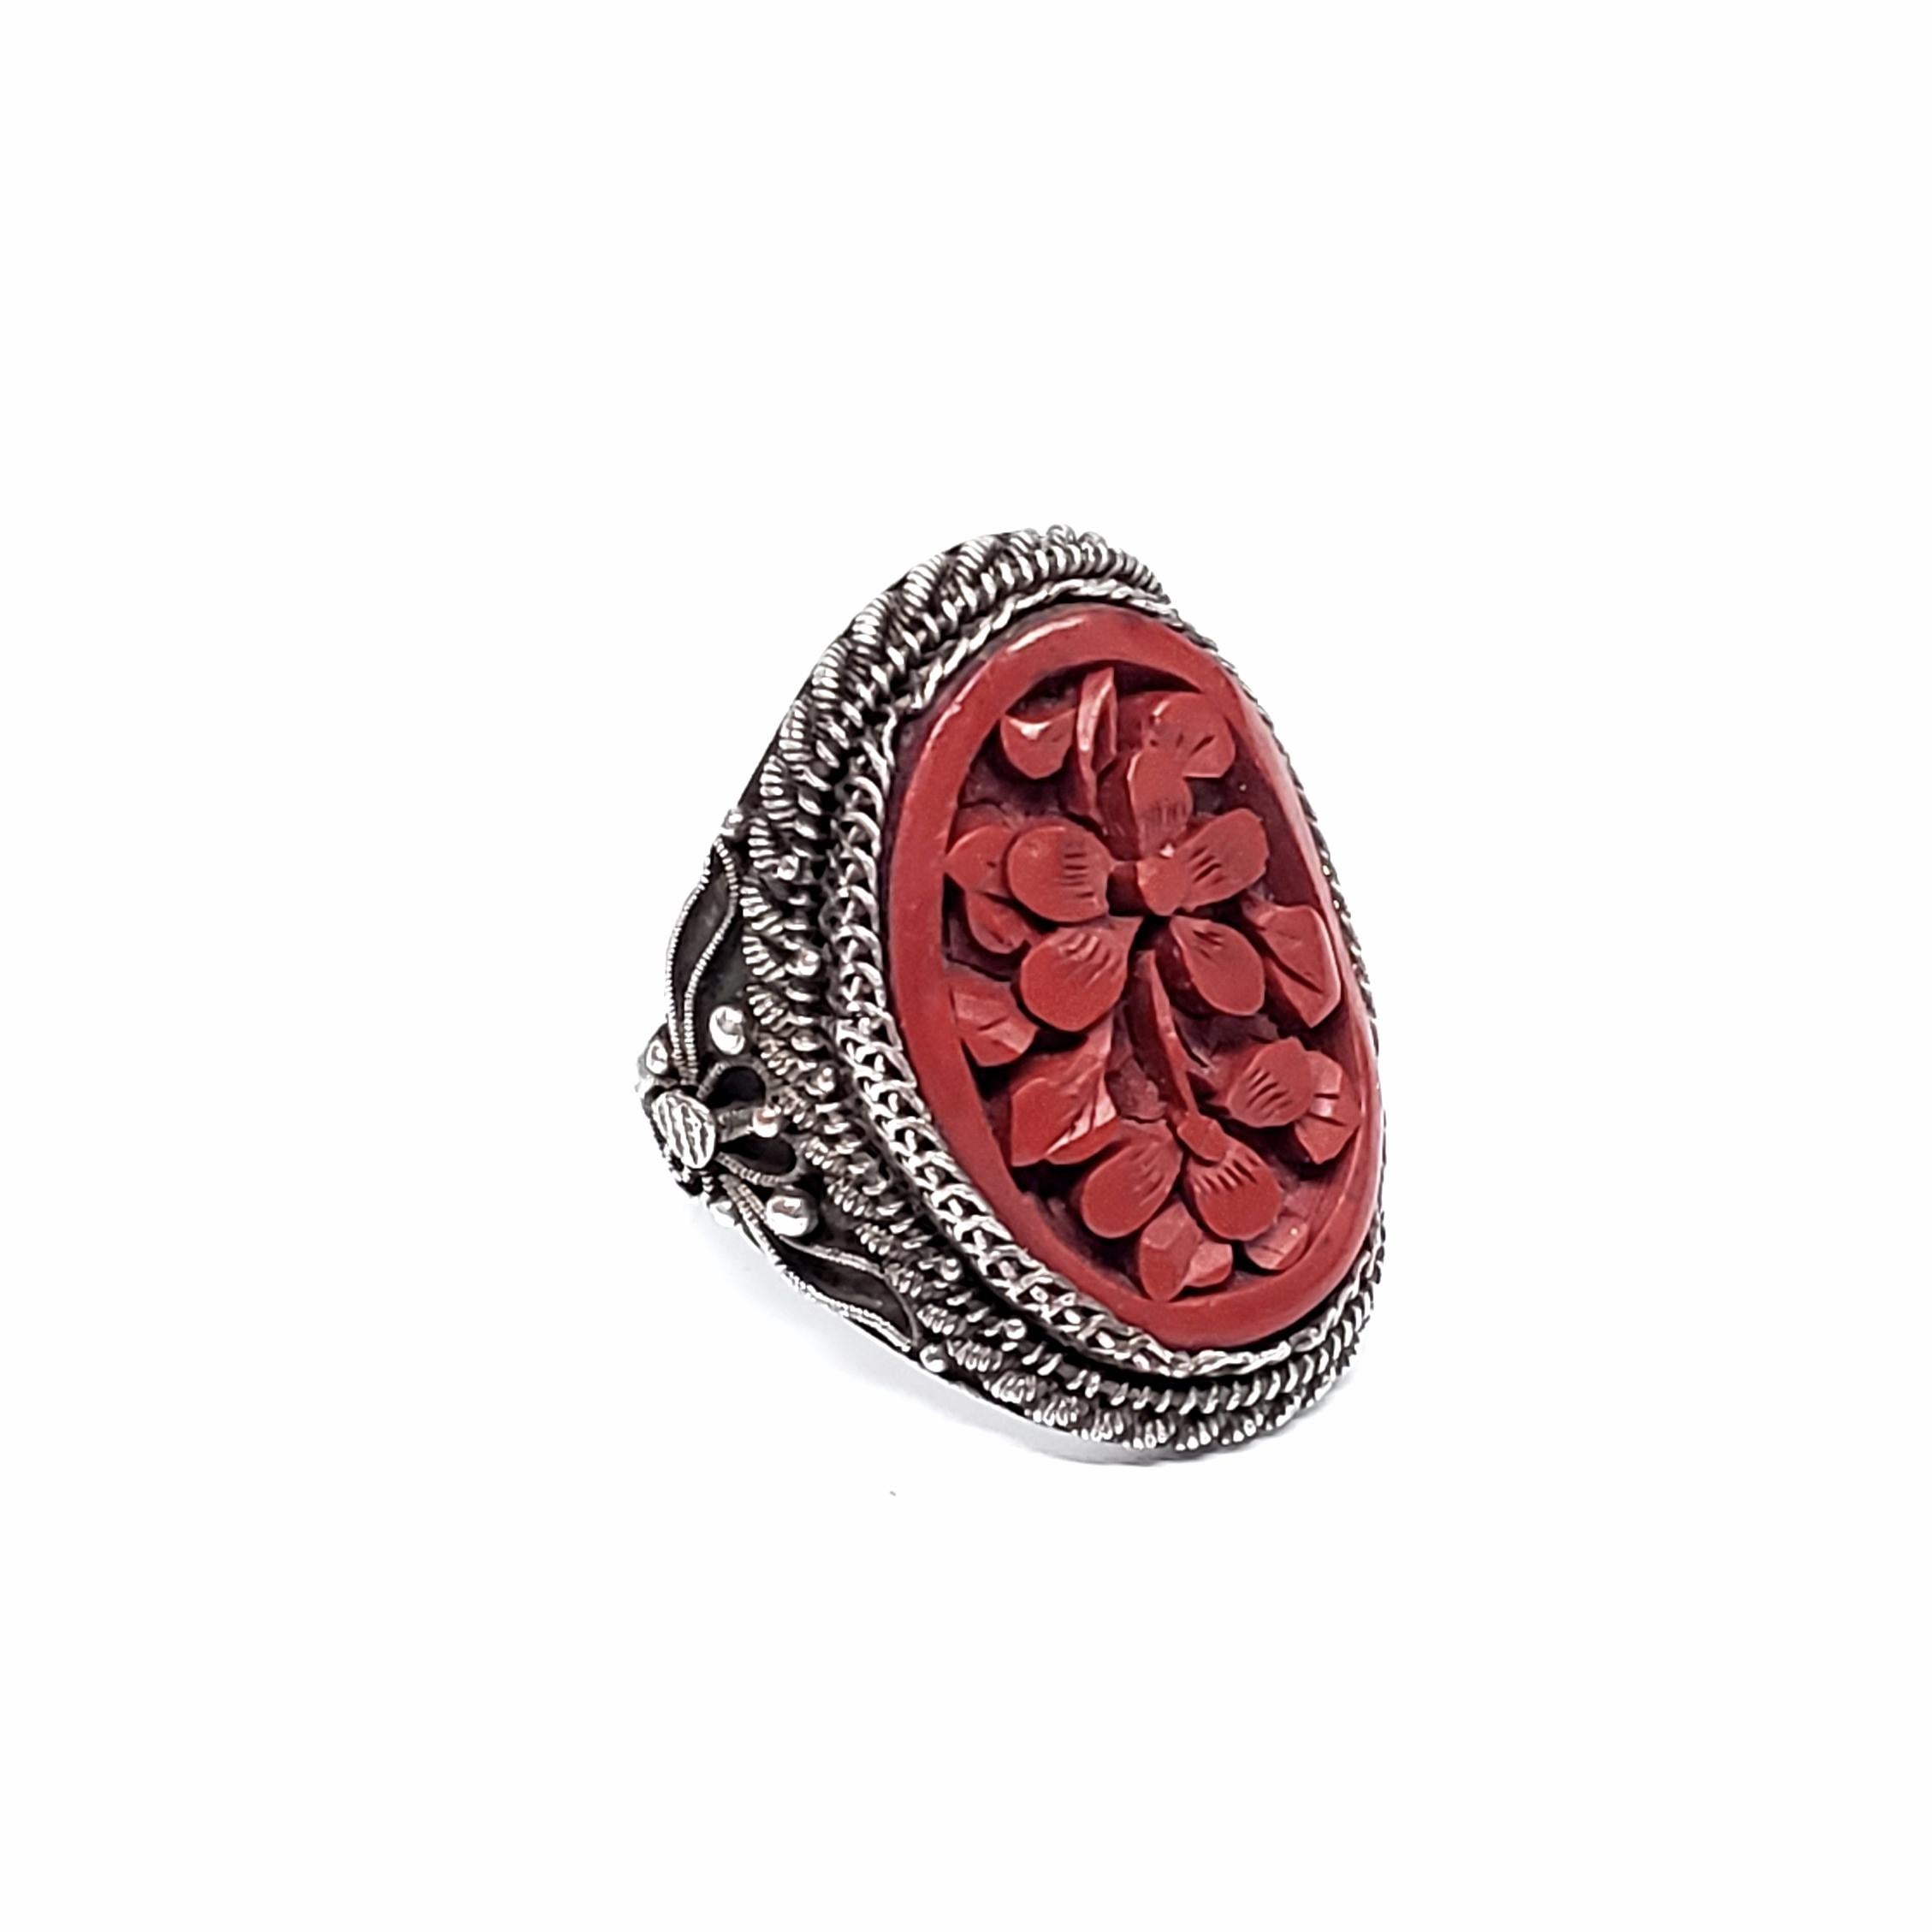 Chinese carved cinnabar ring, circa 1920s.

Beautifully carved cinnabar in a floral design, bezel set in a silver-toned ring with intricate detailing.

Measure 1